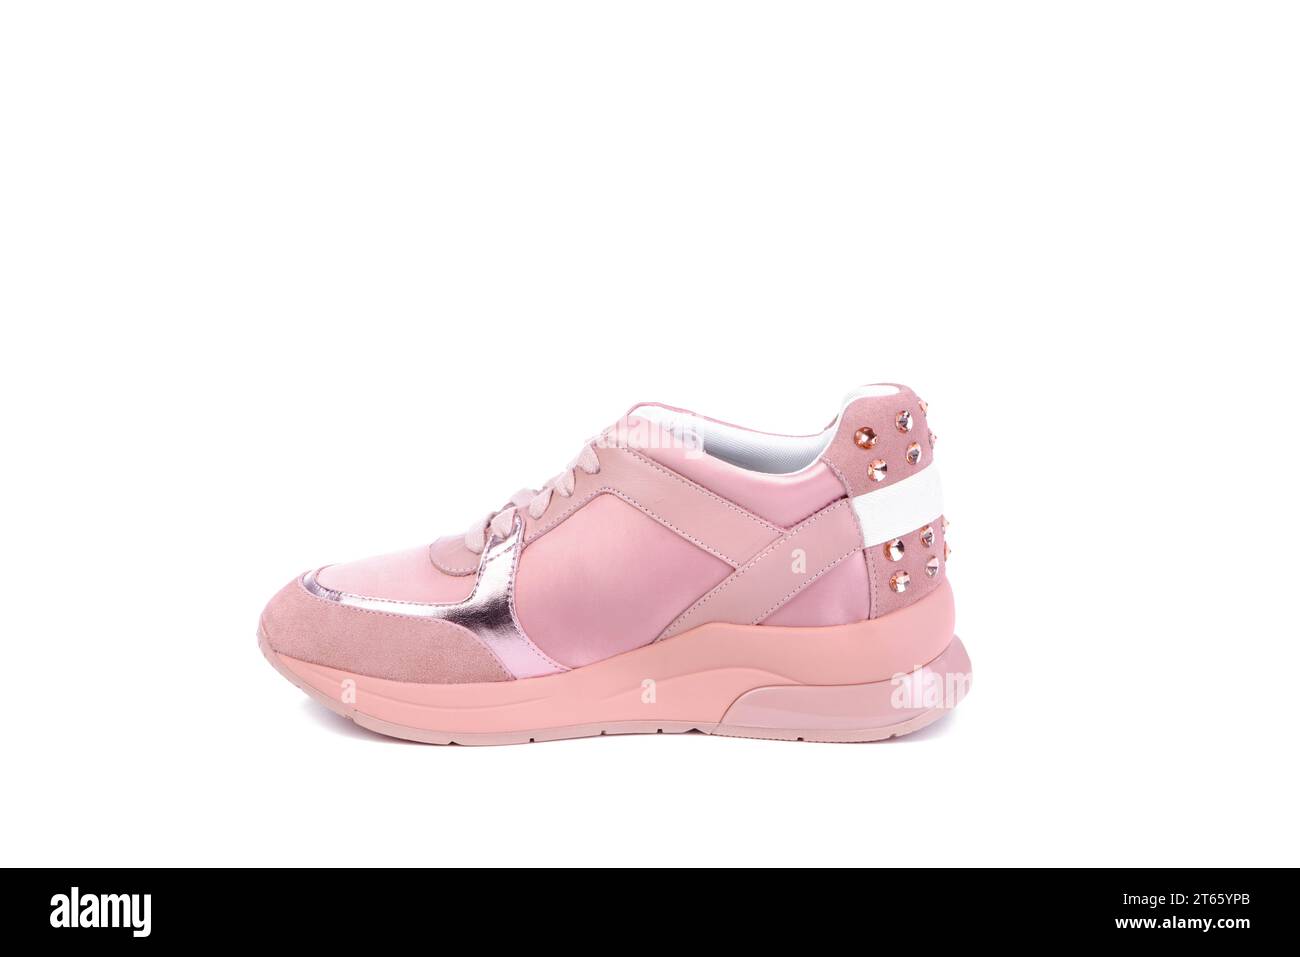 Side view of a stylish women's running shoe made of pink materials of different textures: leather, fabric, and suede. Golden rivets on a counter. Barb Stock Photo